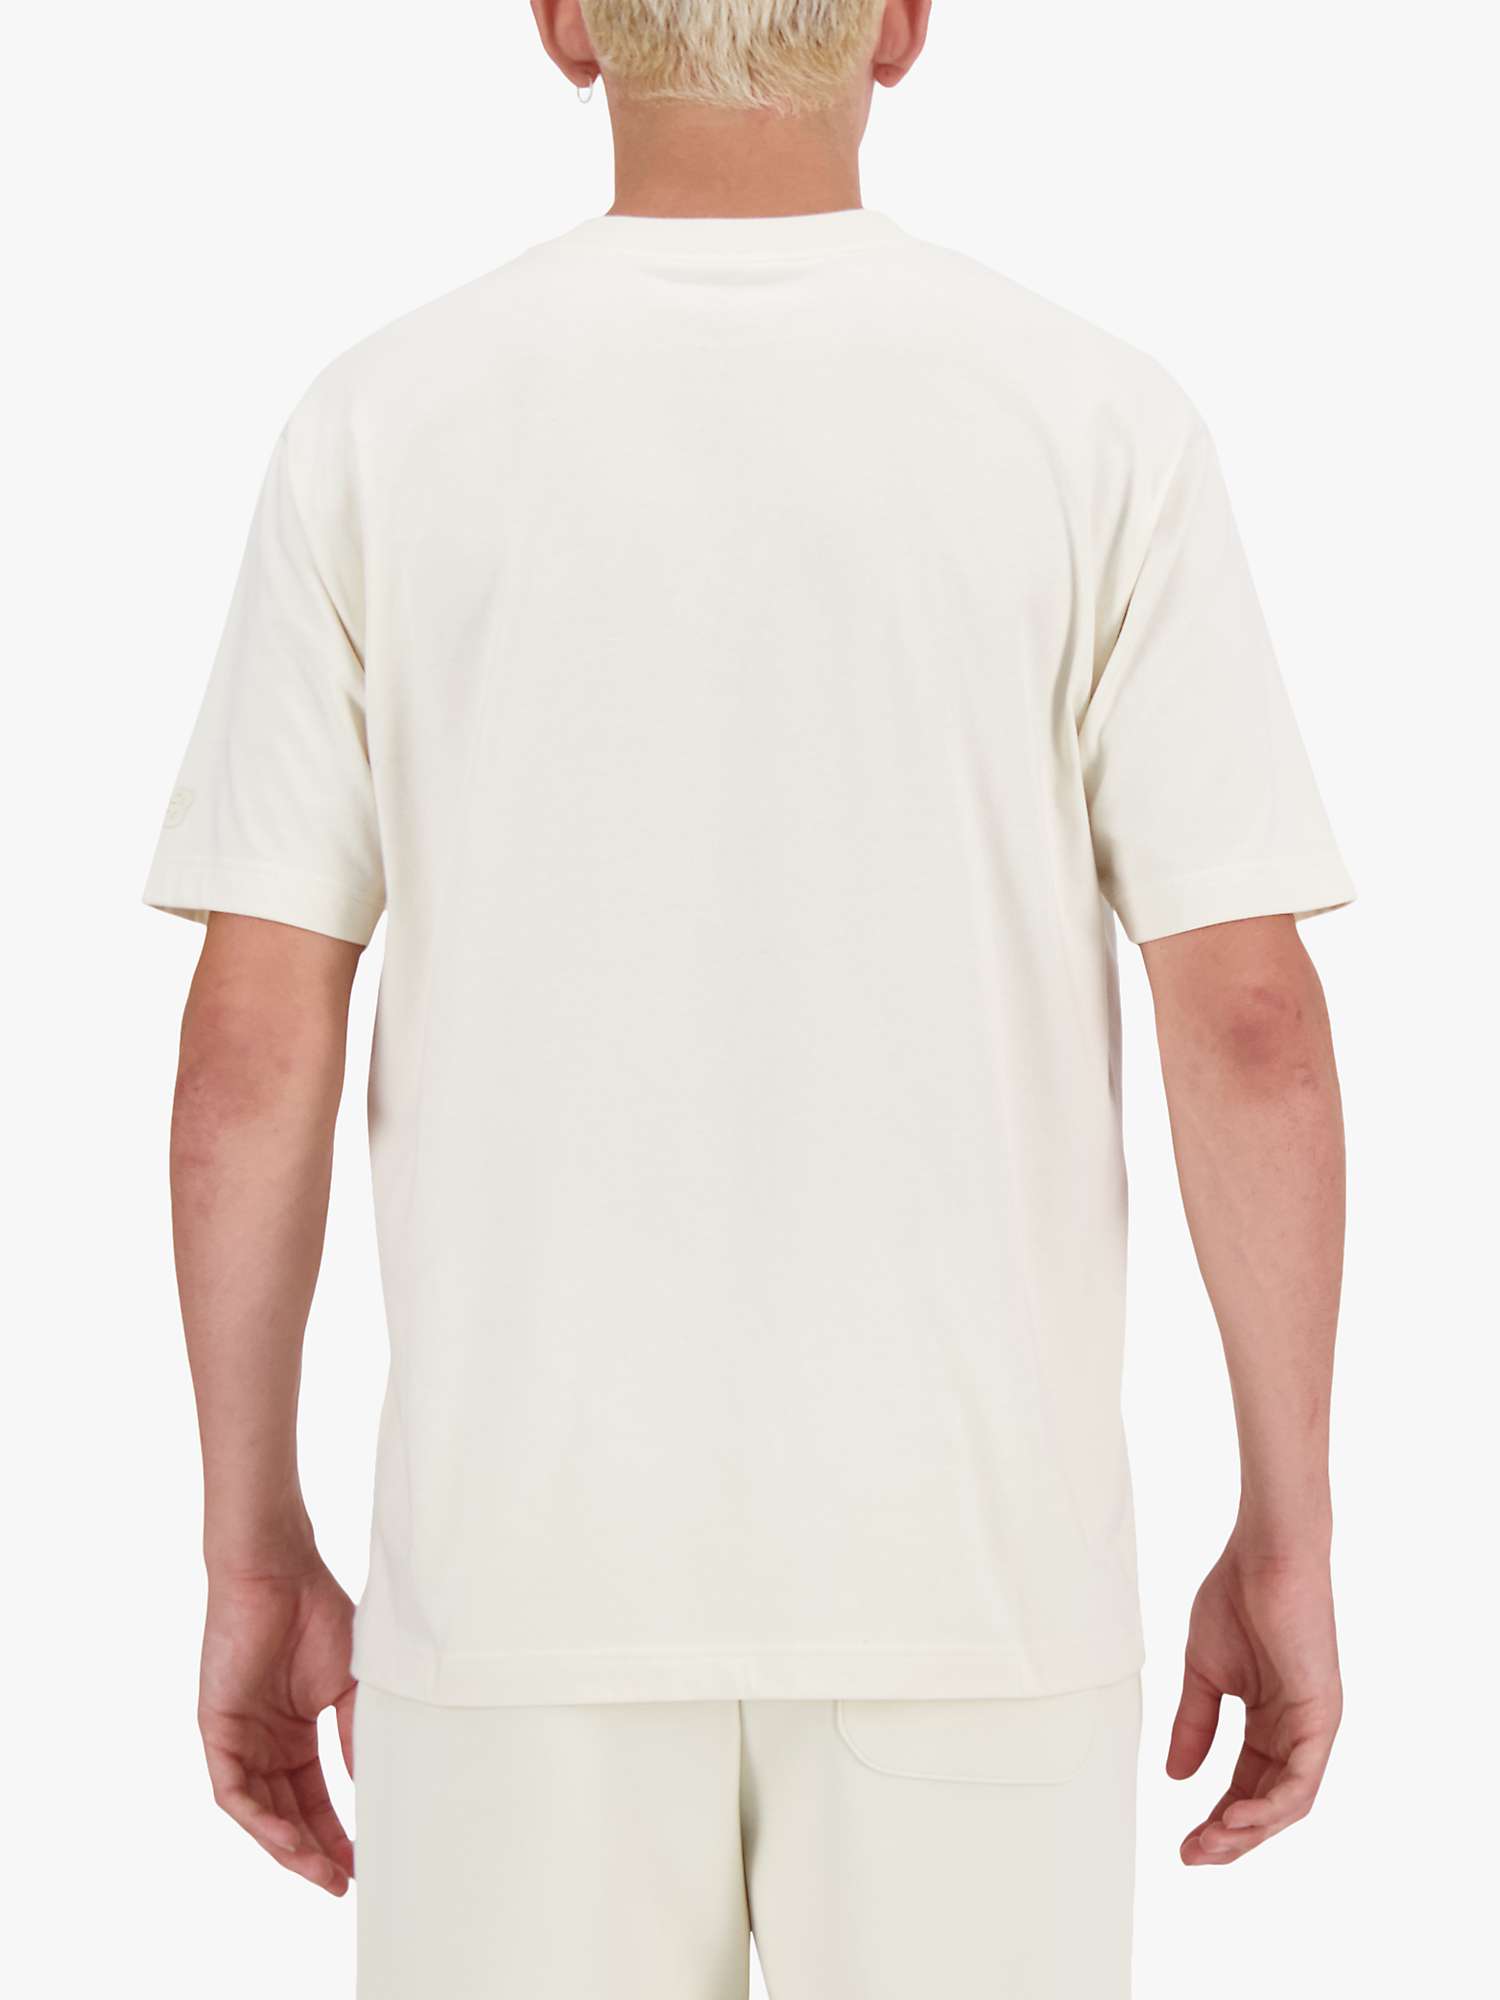 Buy New Balance Shifted Printed T-Shirt, Cream Online at johnlewis.com